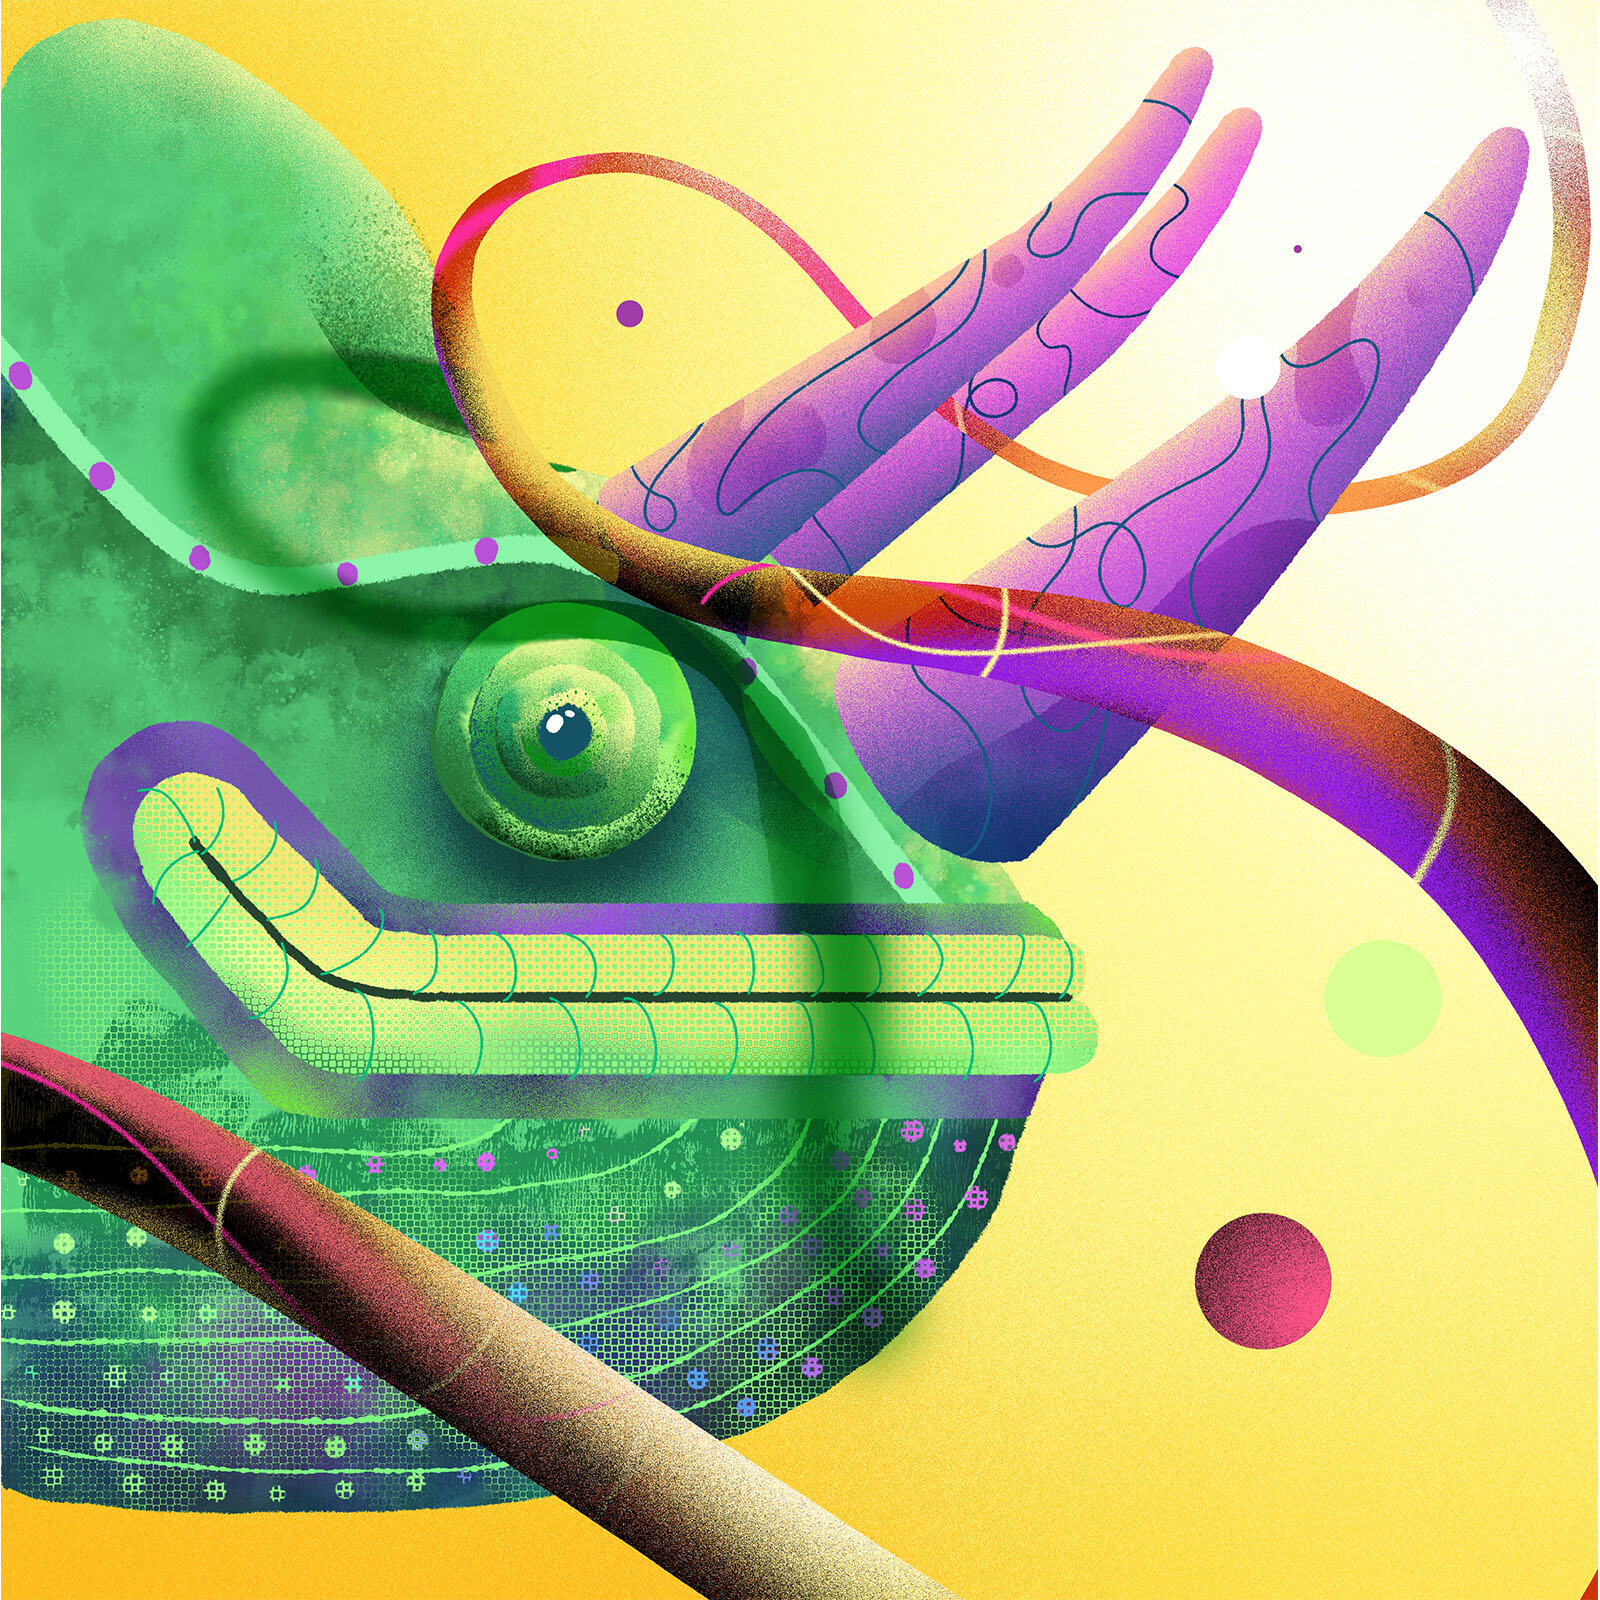 All squres_Small_0005_Cameleon Head_square.jpg